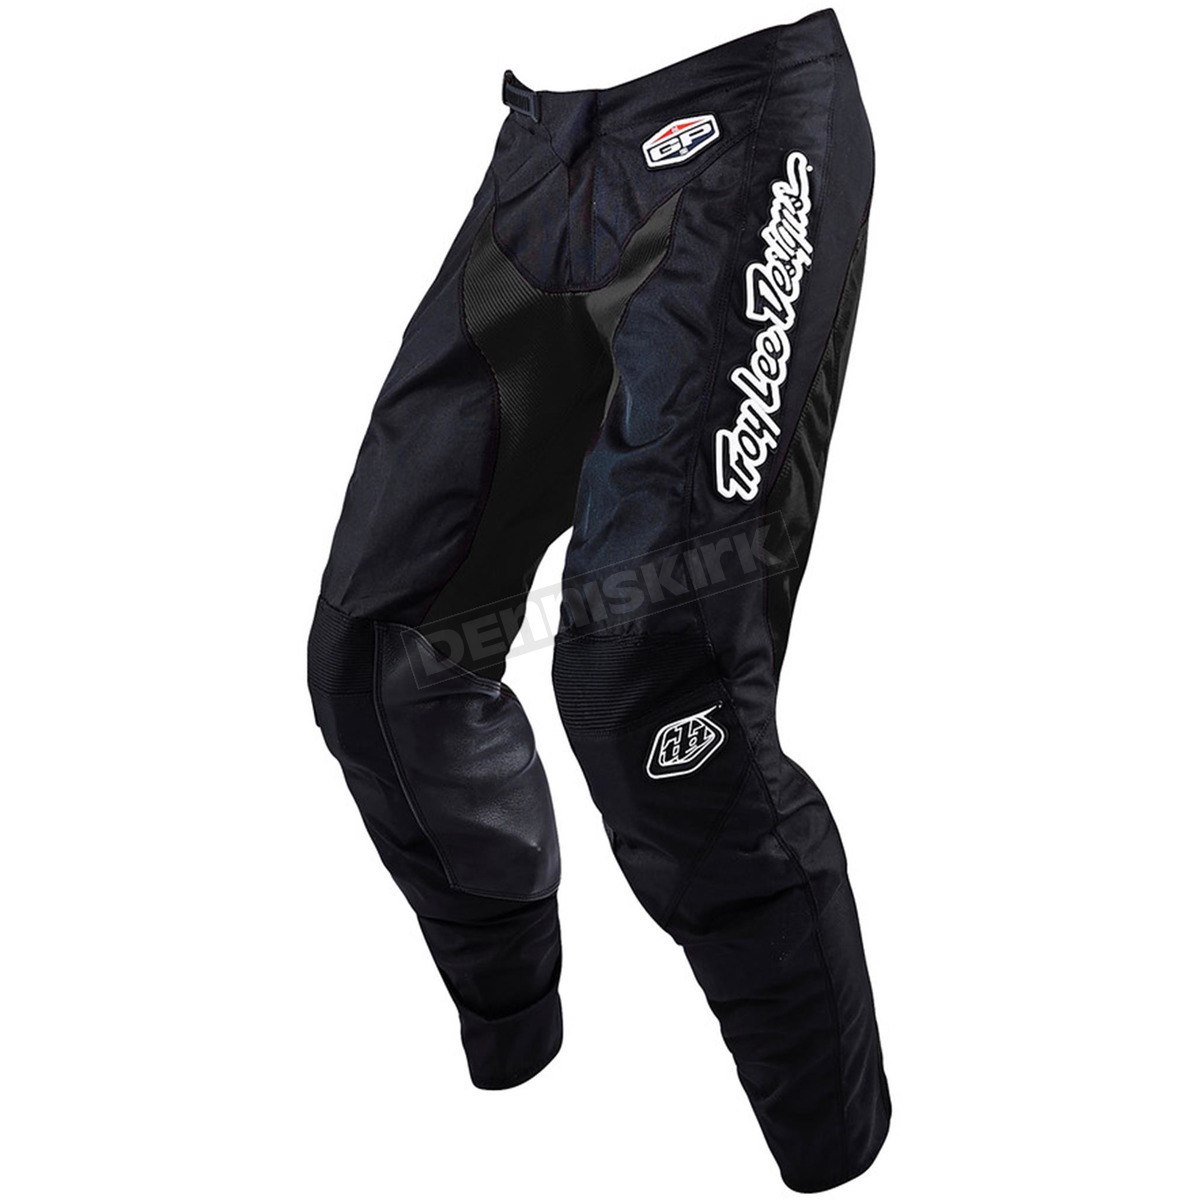 TROY LEE DESIGNS OPEN BOX YOUTH GP PANT MIDNIGHT BLACK 209002204 SIZE 22